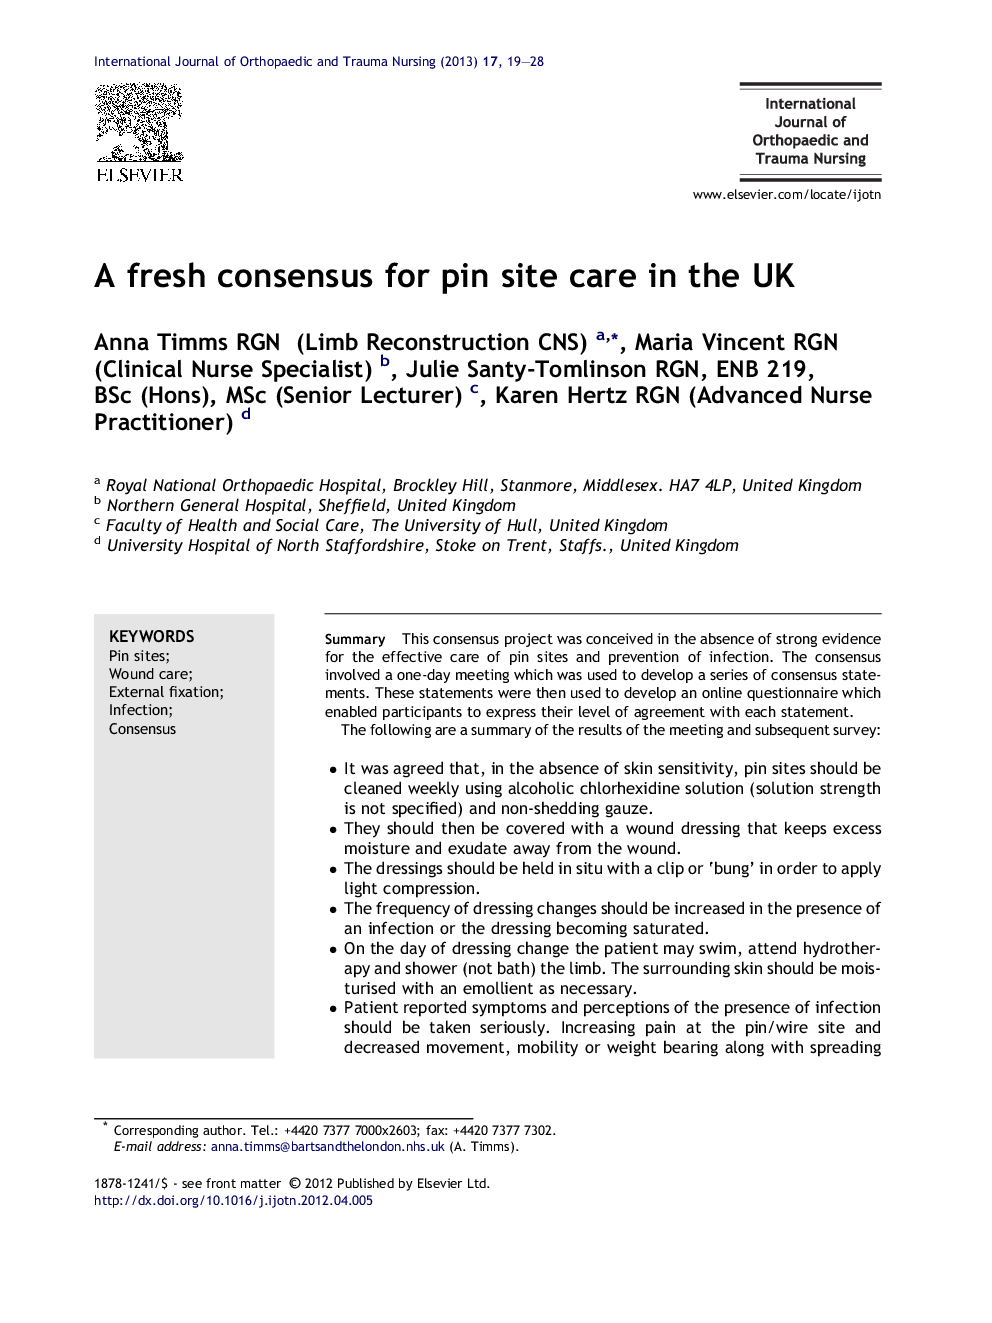 A fresh consensus for pin site care in the UK